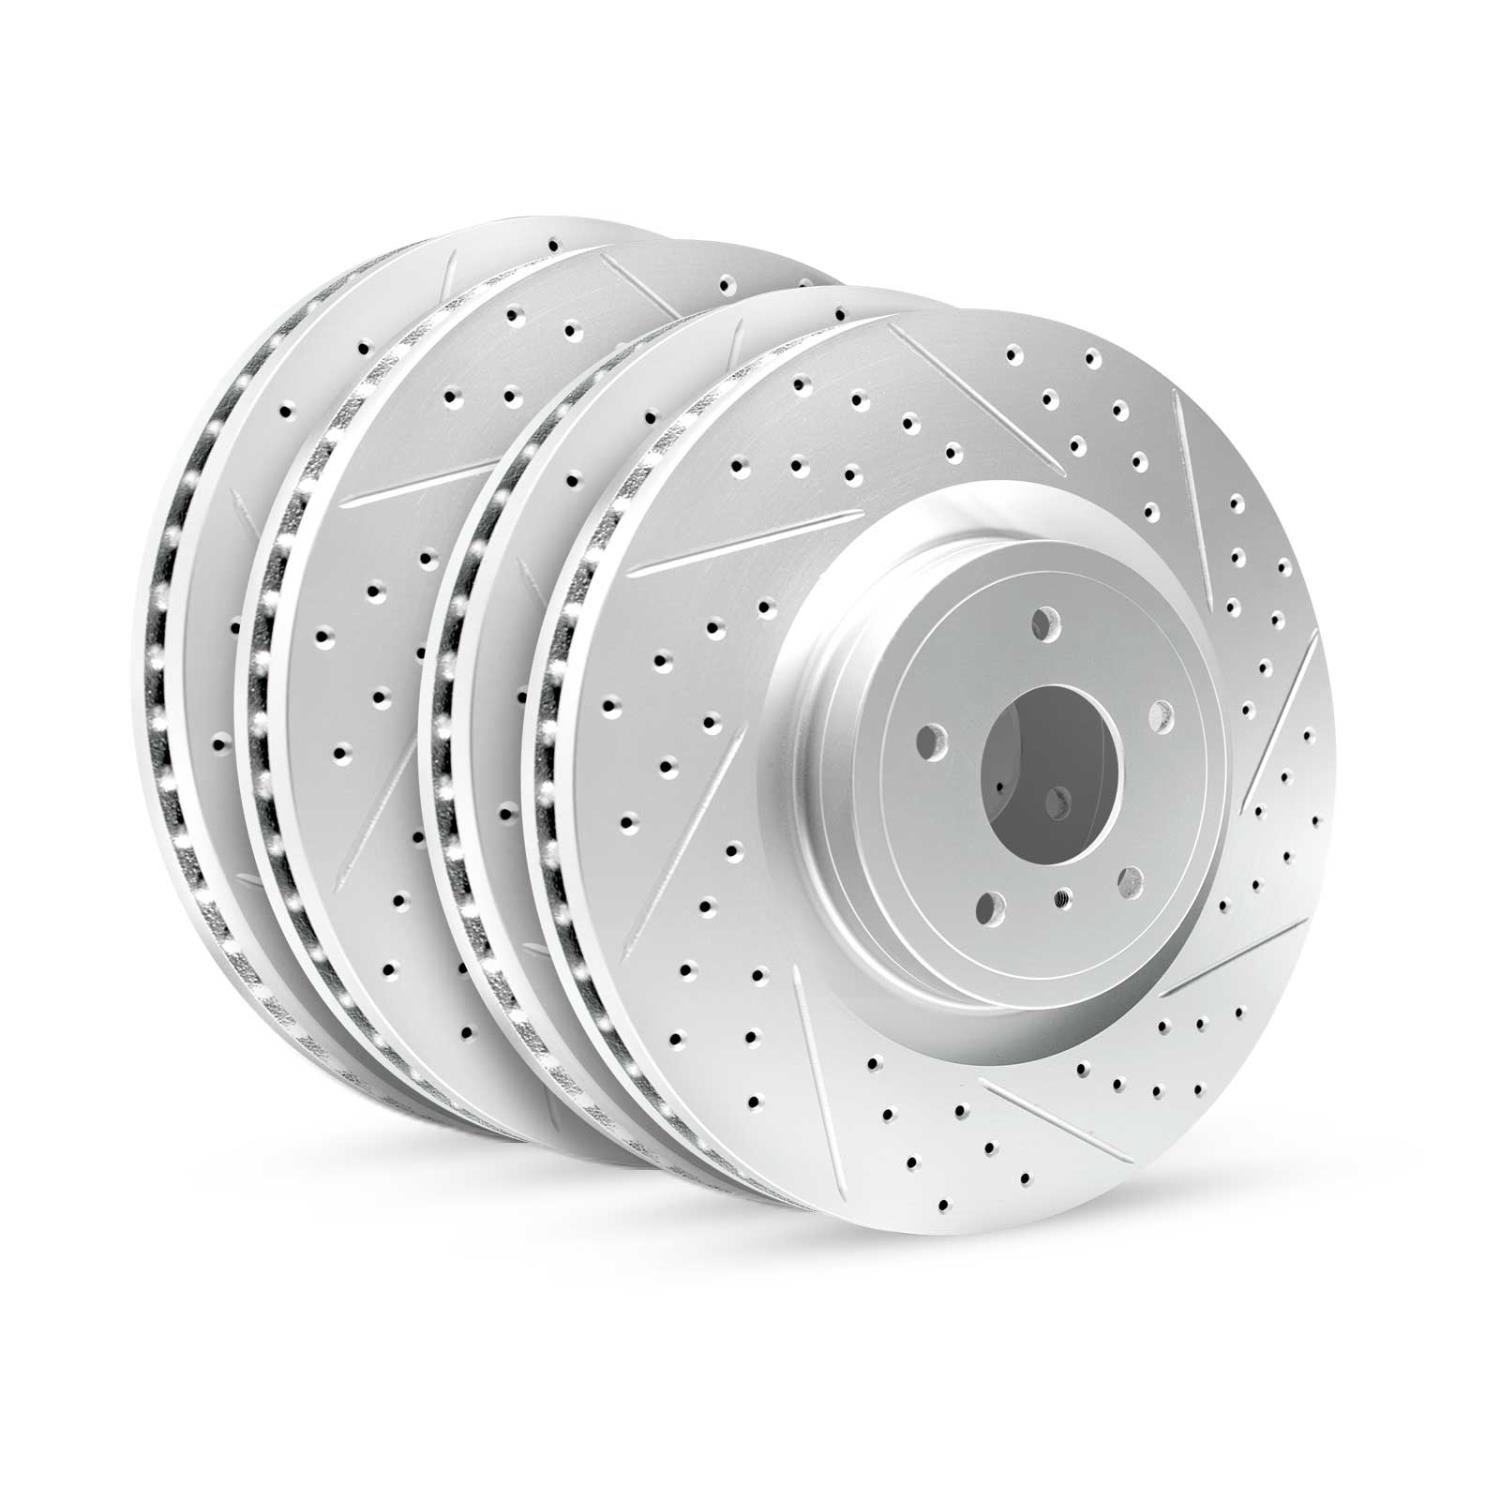 GEO-Carbon Drilled/Slotted Rotors, 2009-2017 Fits Multiple Makes/Models, Position: Front/Rear